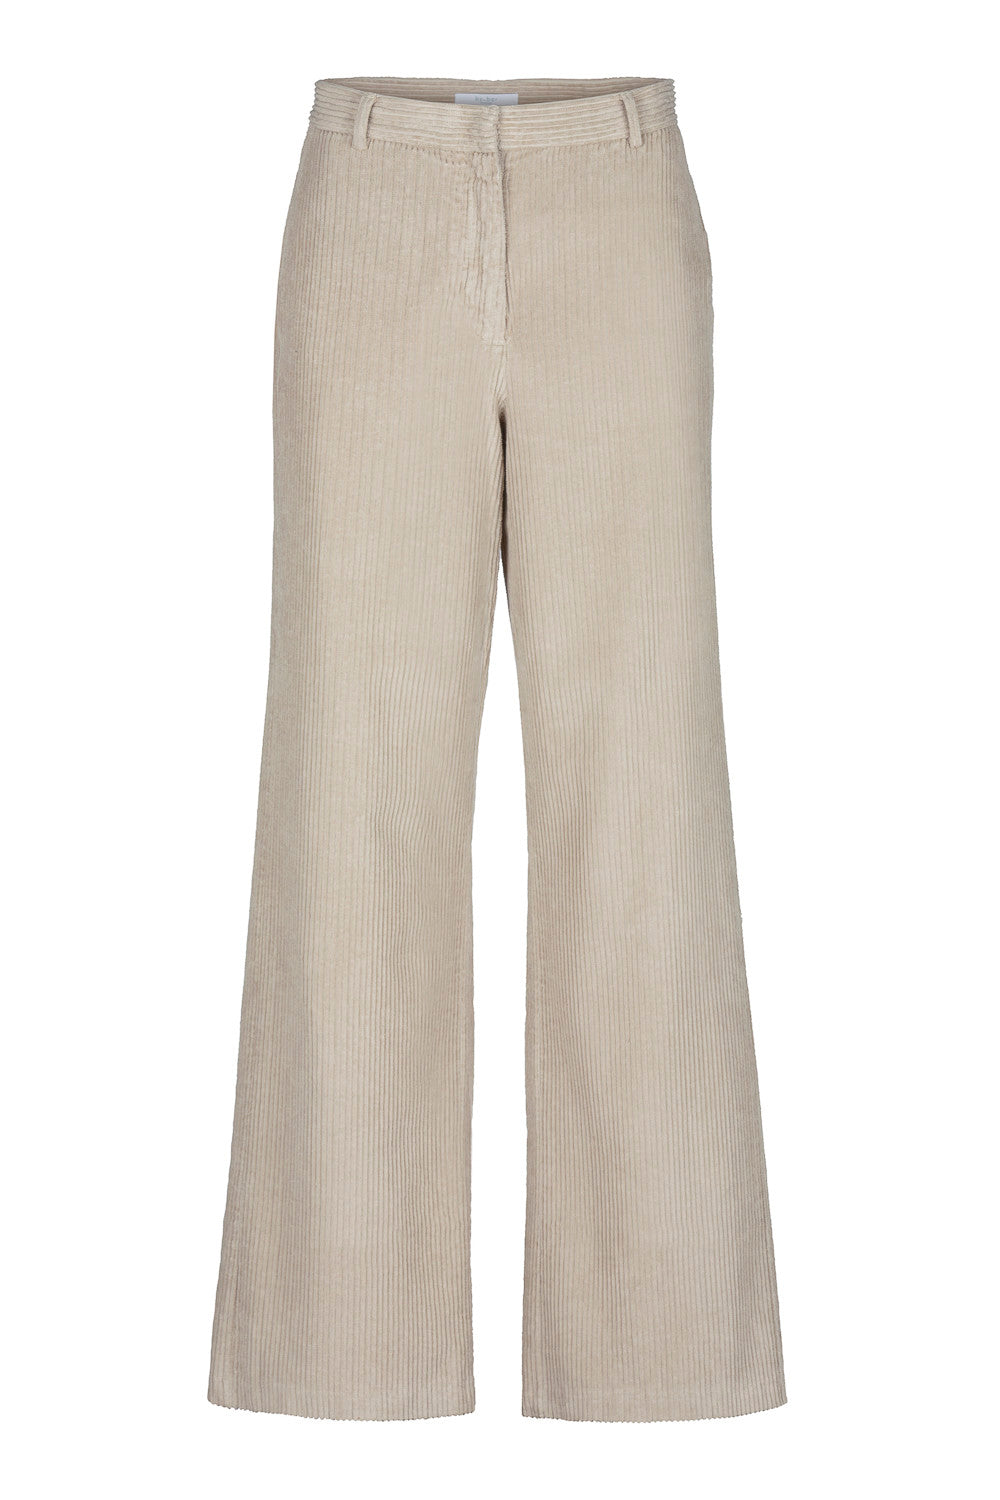 By-Bar reine pant silver stone